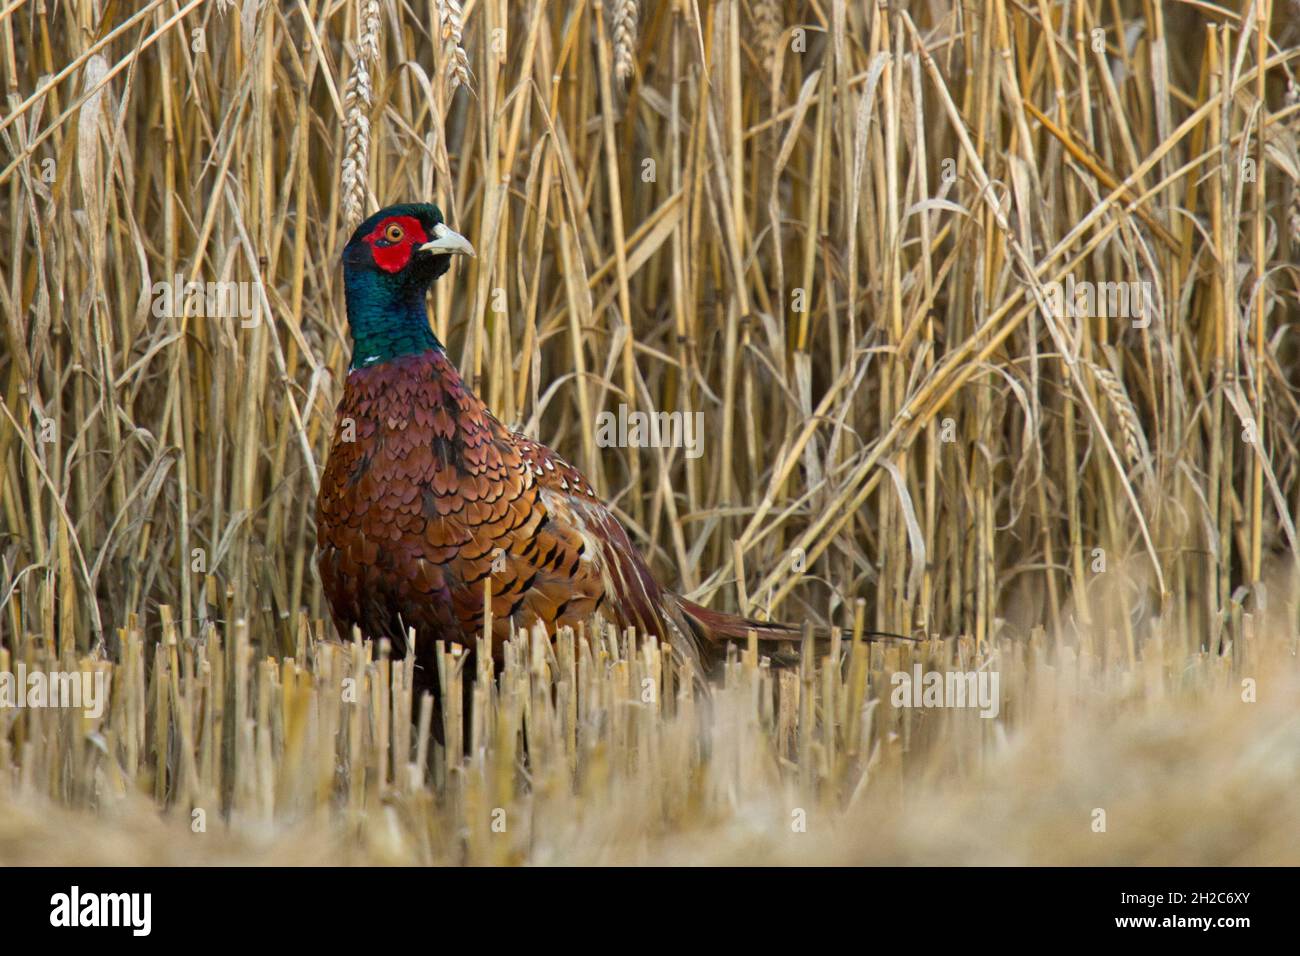 Pheasant / Ring-necked pheasant ( Phasianus colchicus ), colorful cock, male bird in midst of a half harvested corn field is missing its coverage, wil Stock Photo